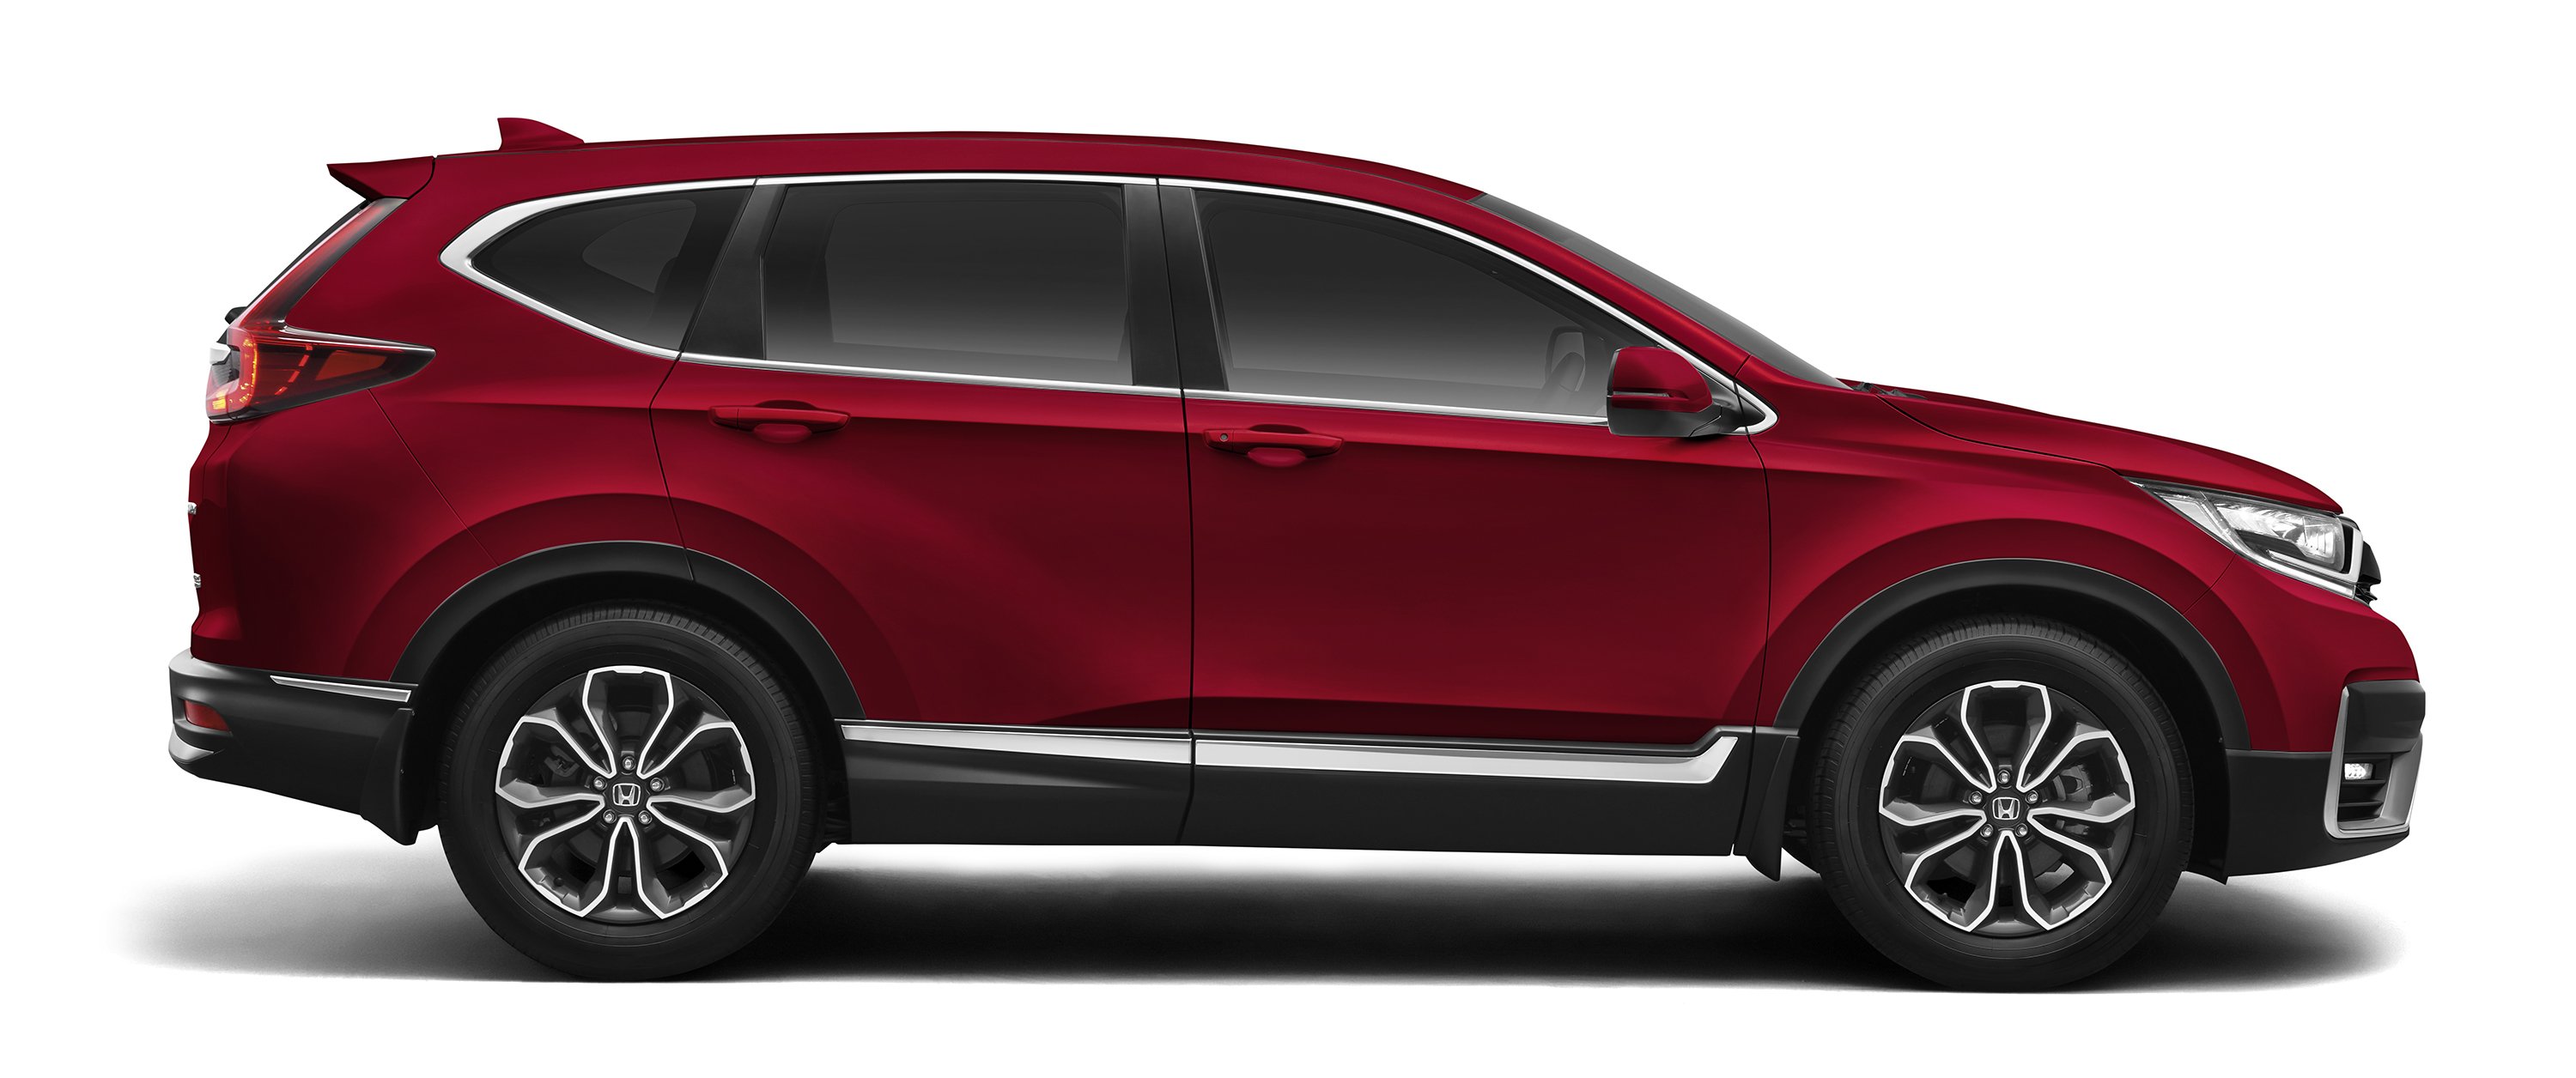 Honda Malaysia Elevates The Look Of The CR-V With New Colours - thumbnail